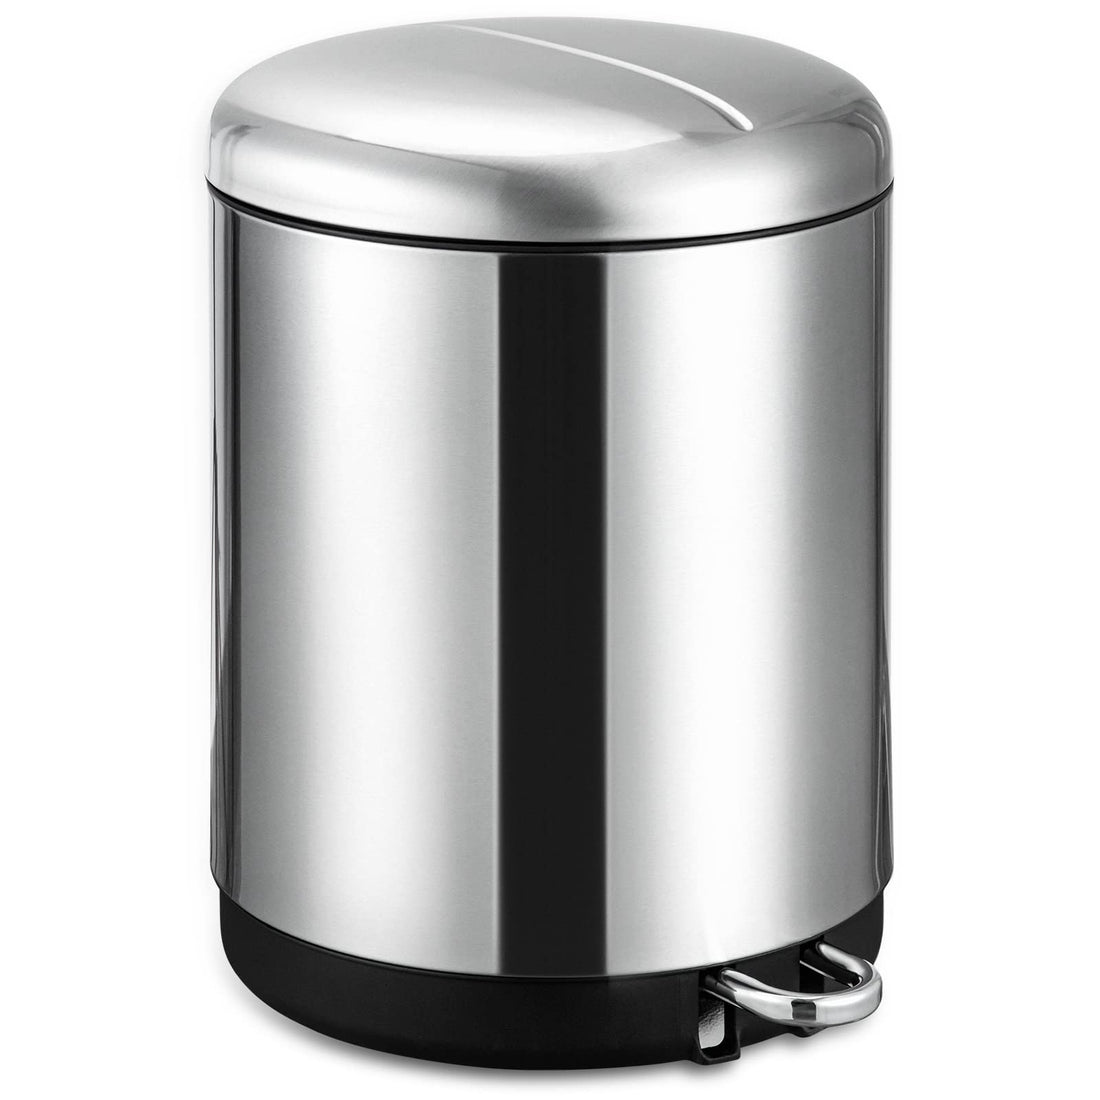 Trash Can Stainless Steel 2x15L Garbage Can Soft Close Lid Steel Pedal Recycle Bin Silver